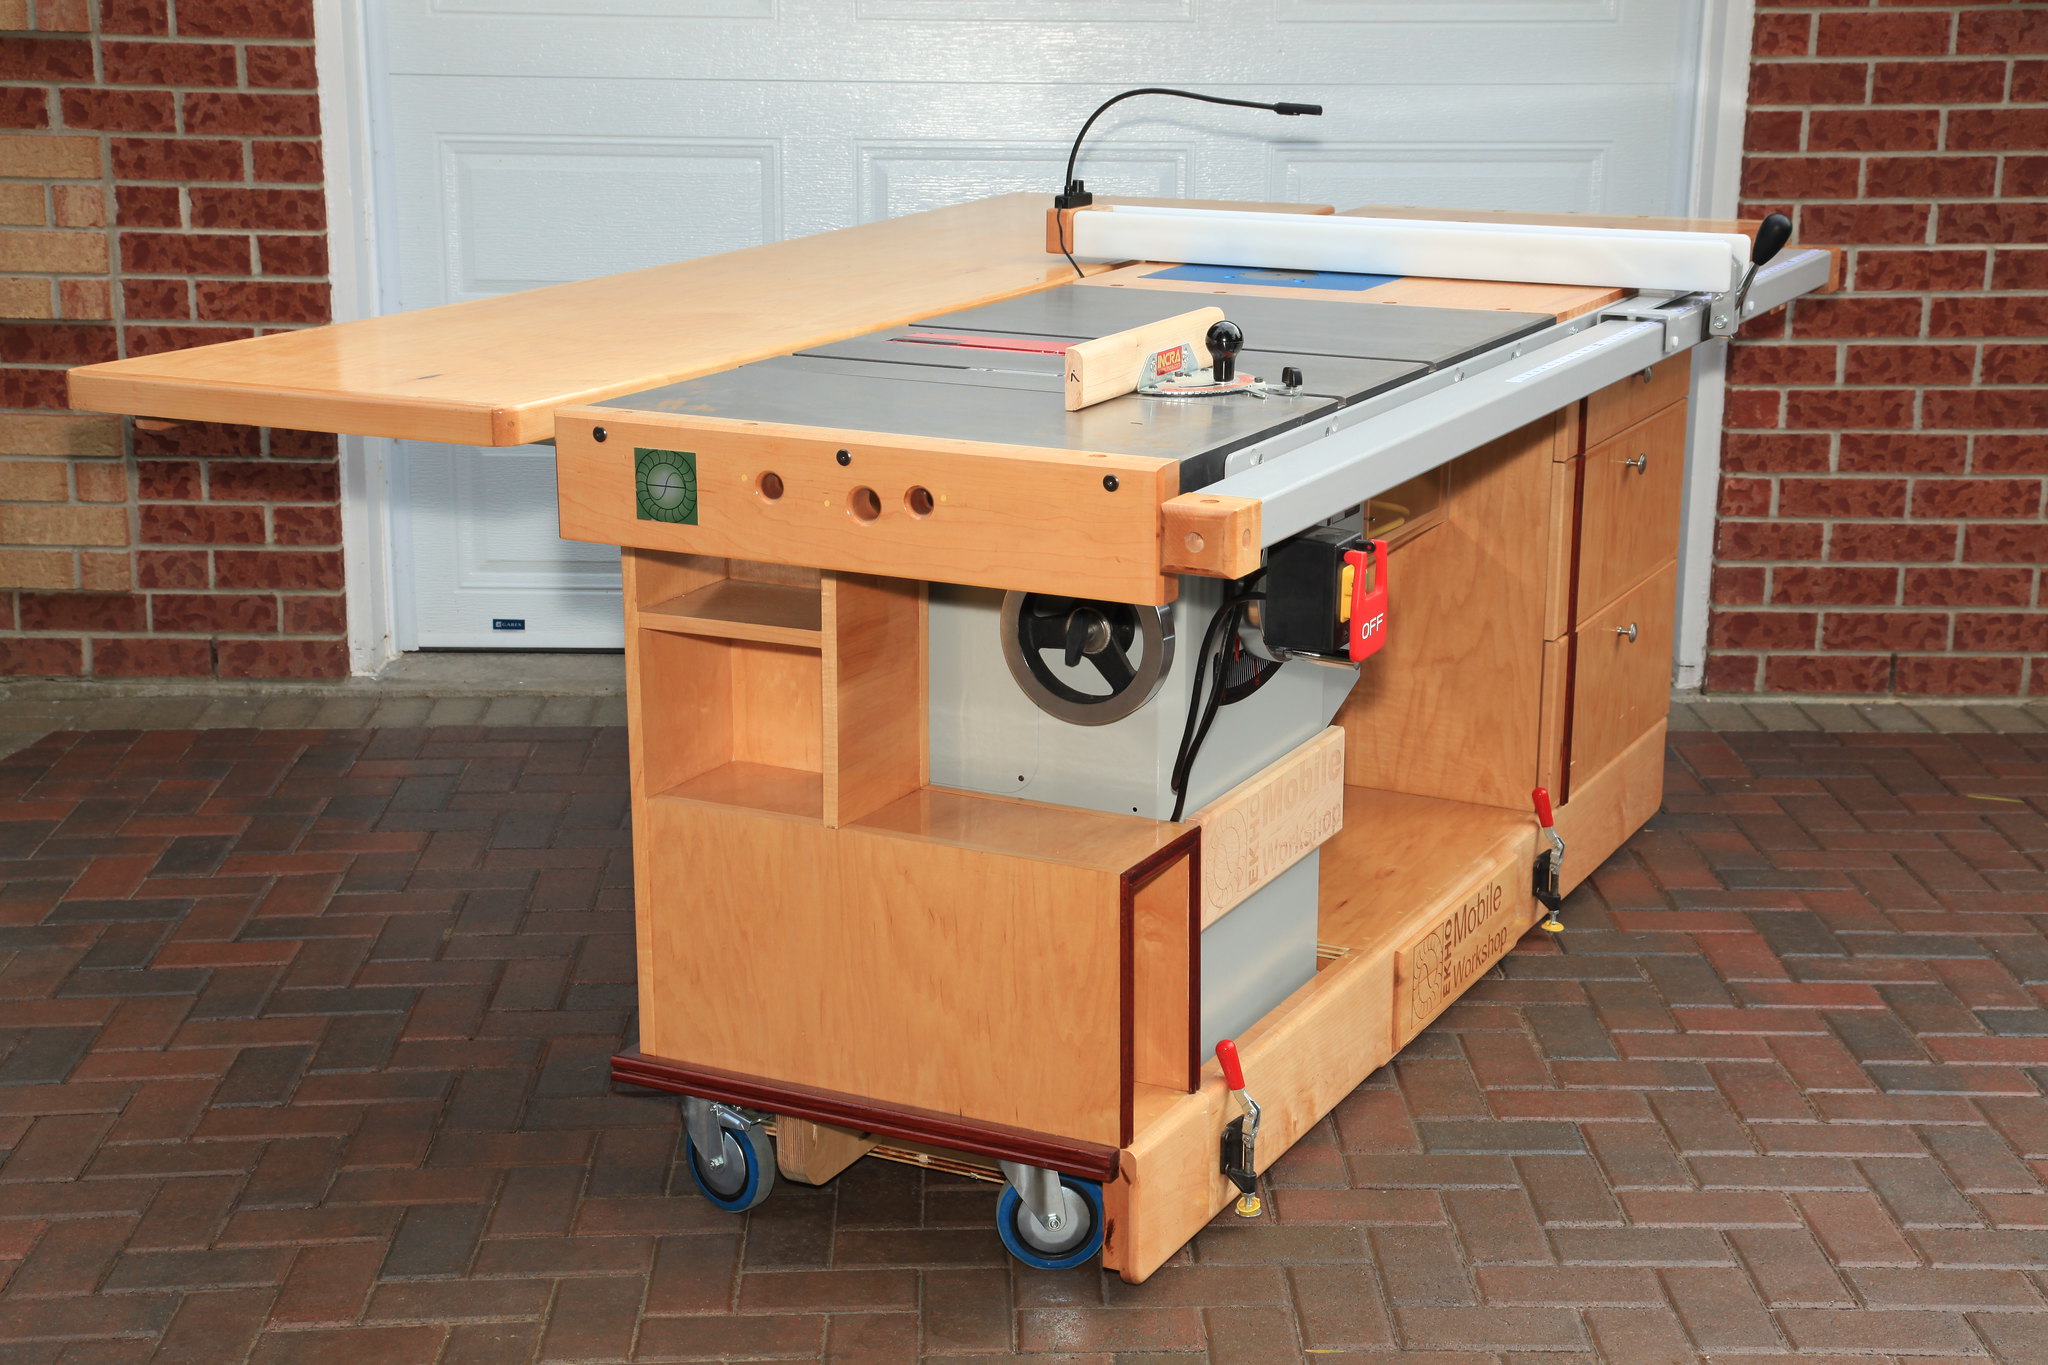 Best Table Saw Review – Our Top Picks & Buying Guide